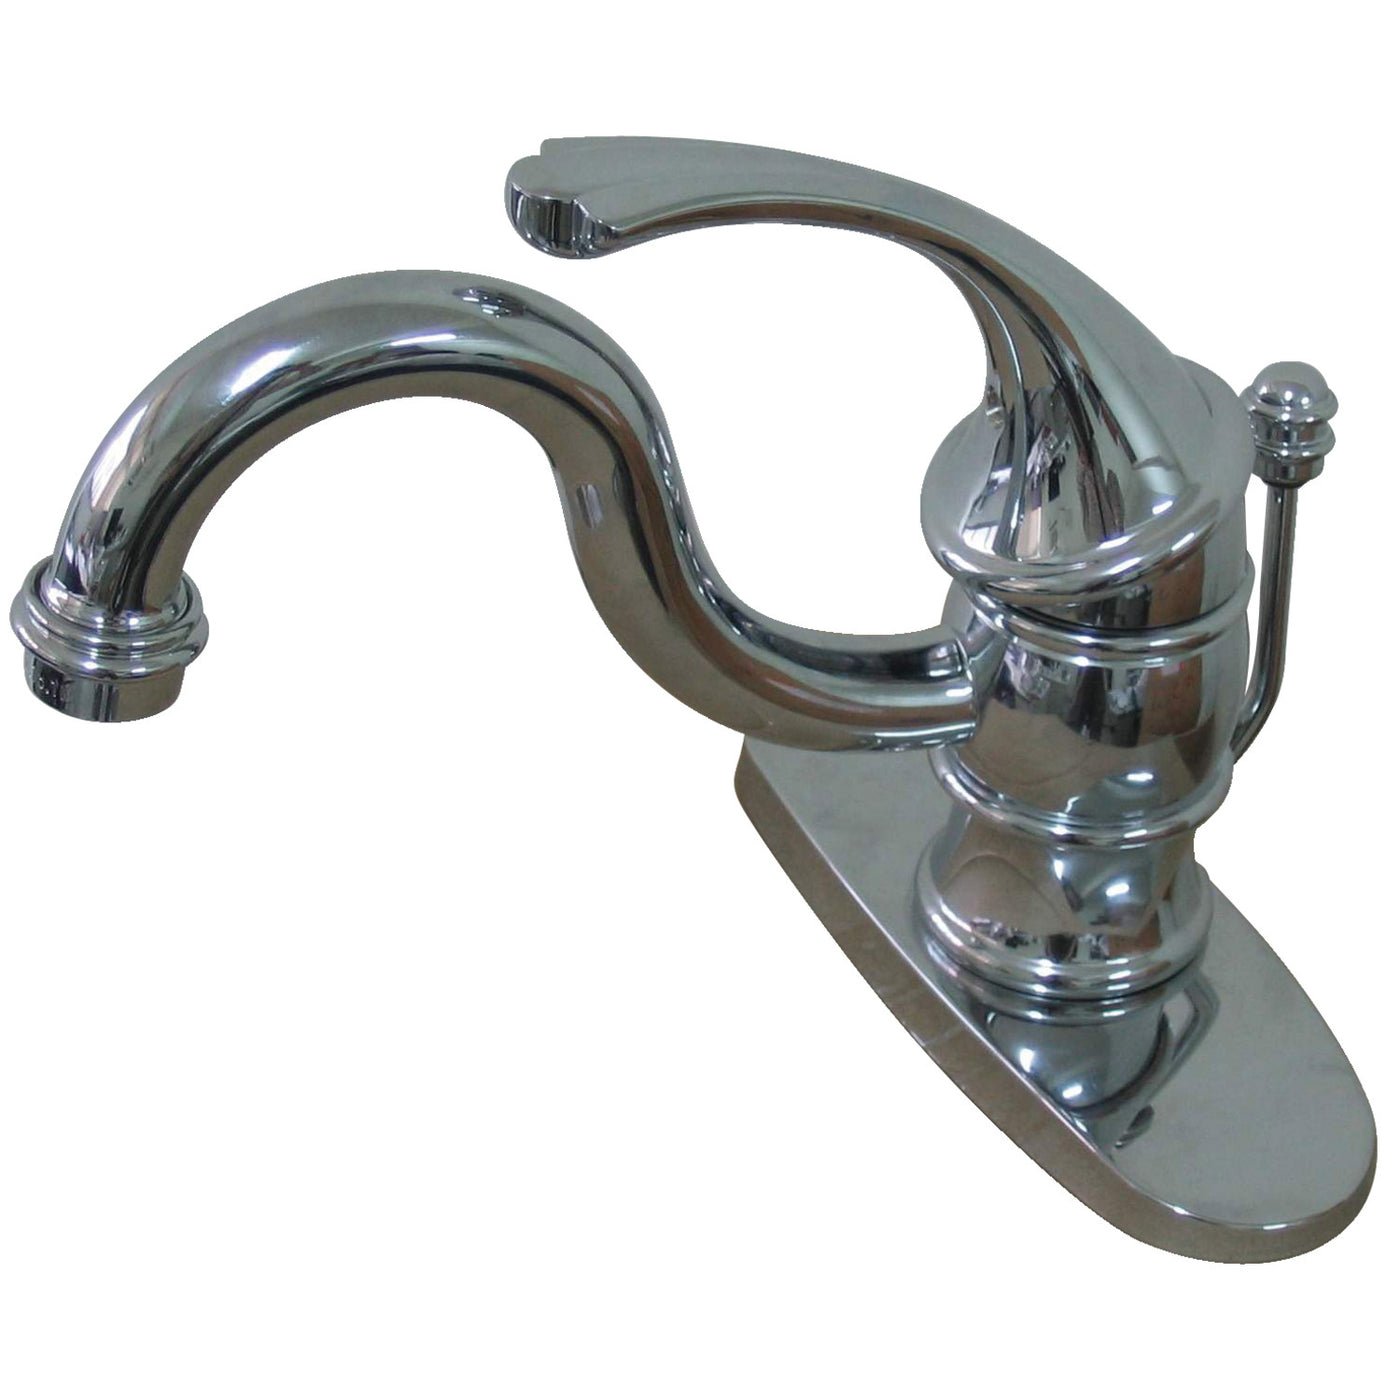 Elements of Design EB3401GL Single-Handle Bathroom Faucet with Pop-Up Drain, Polished Chrome